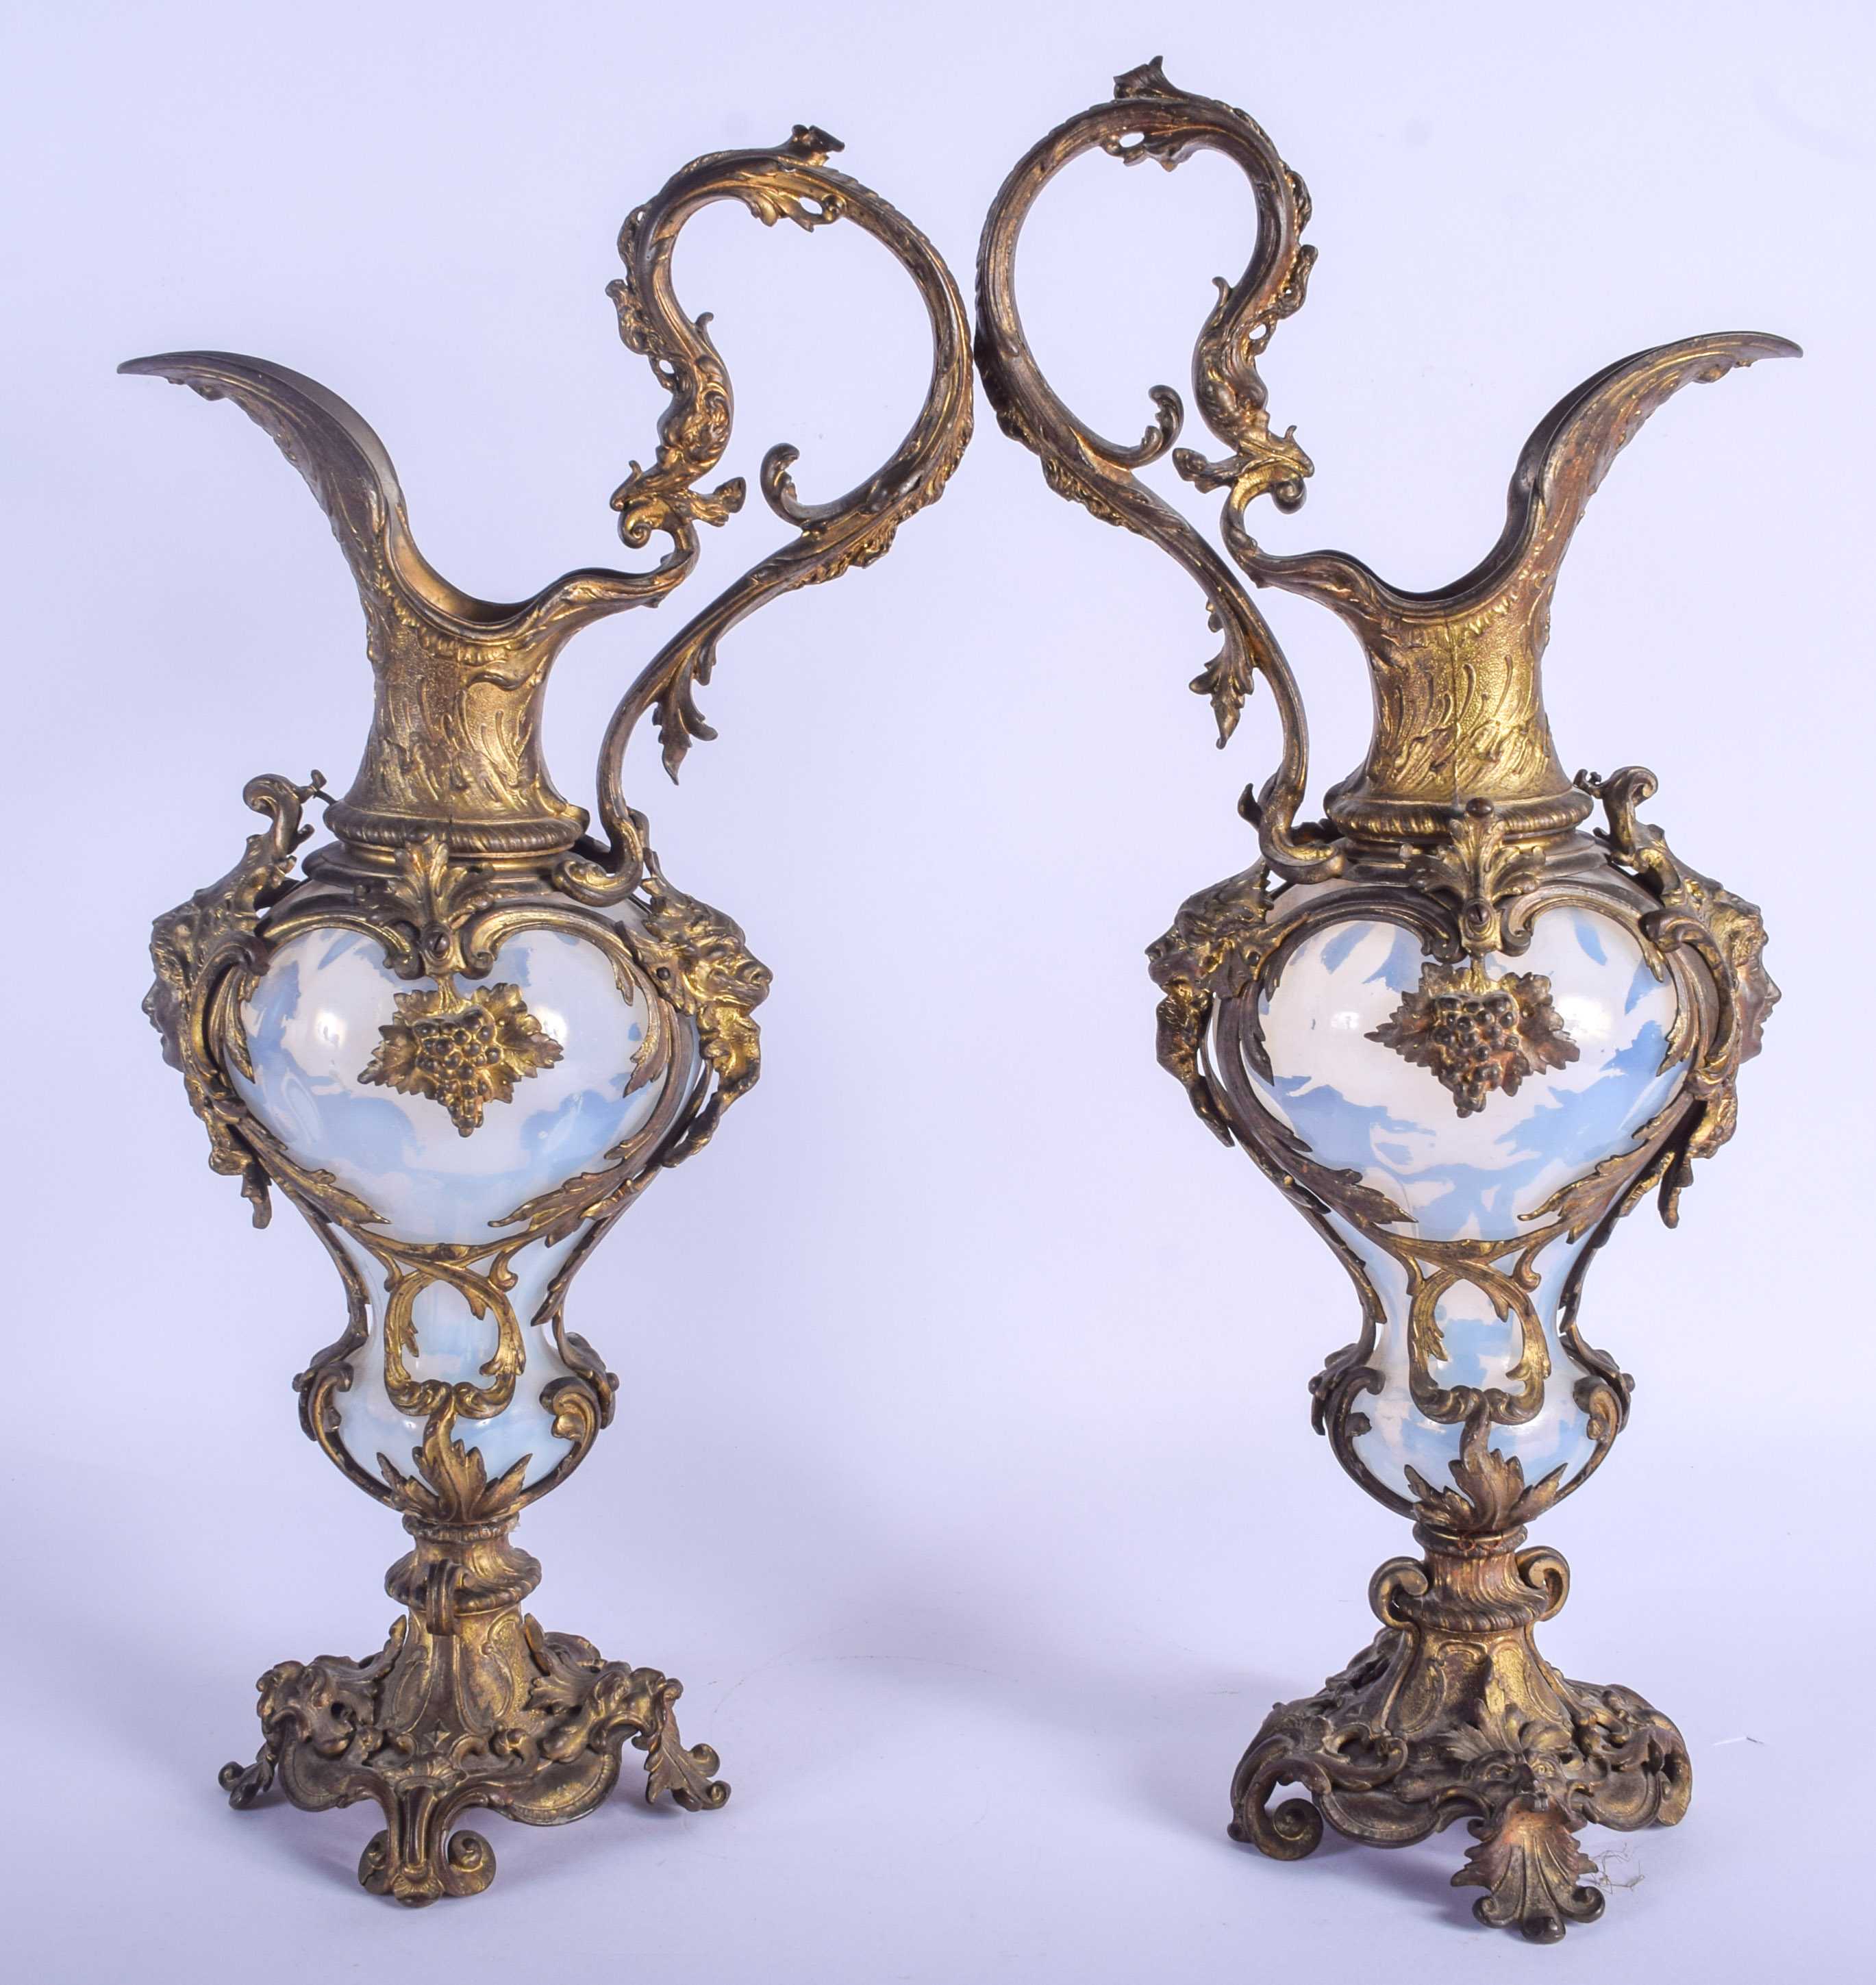 A LARGE PAIR OF 19TH CENTURY VASELINE GLASS EWERS mounted in French bronze. 47 cm x 16 cm. - Image 2 of 4